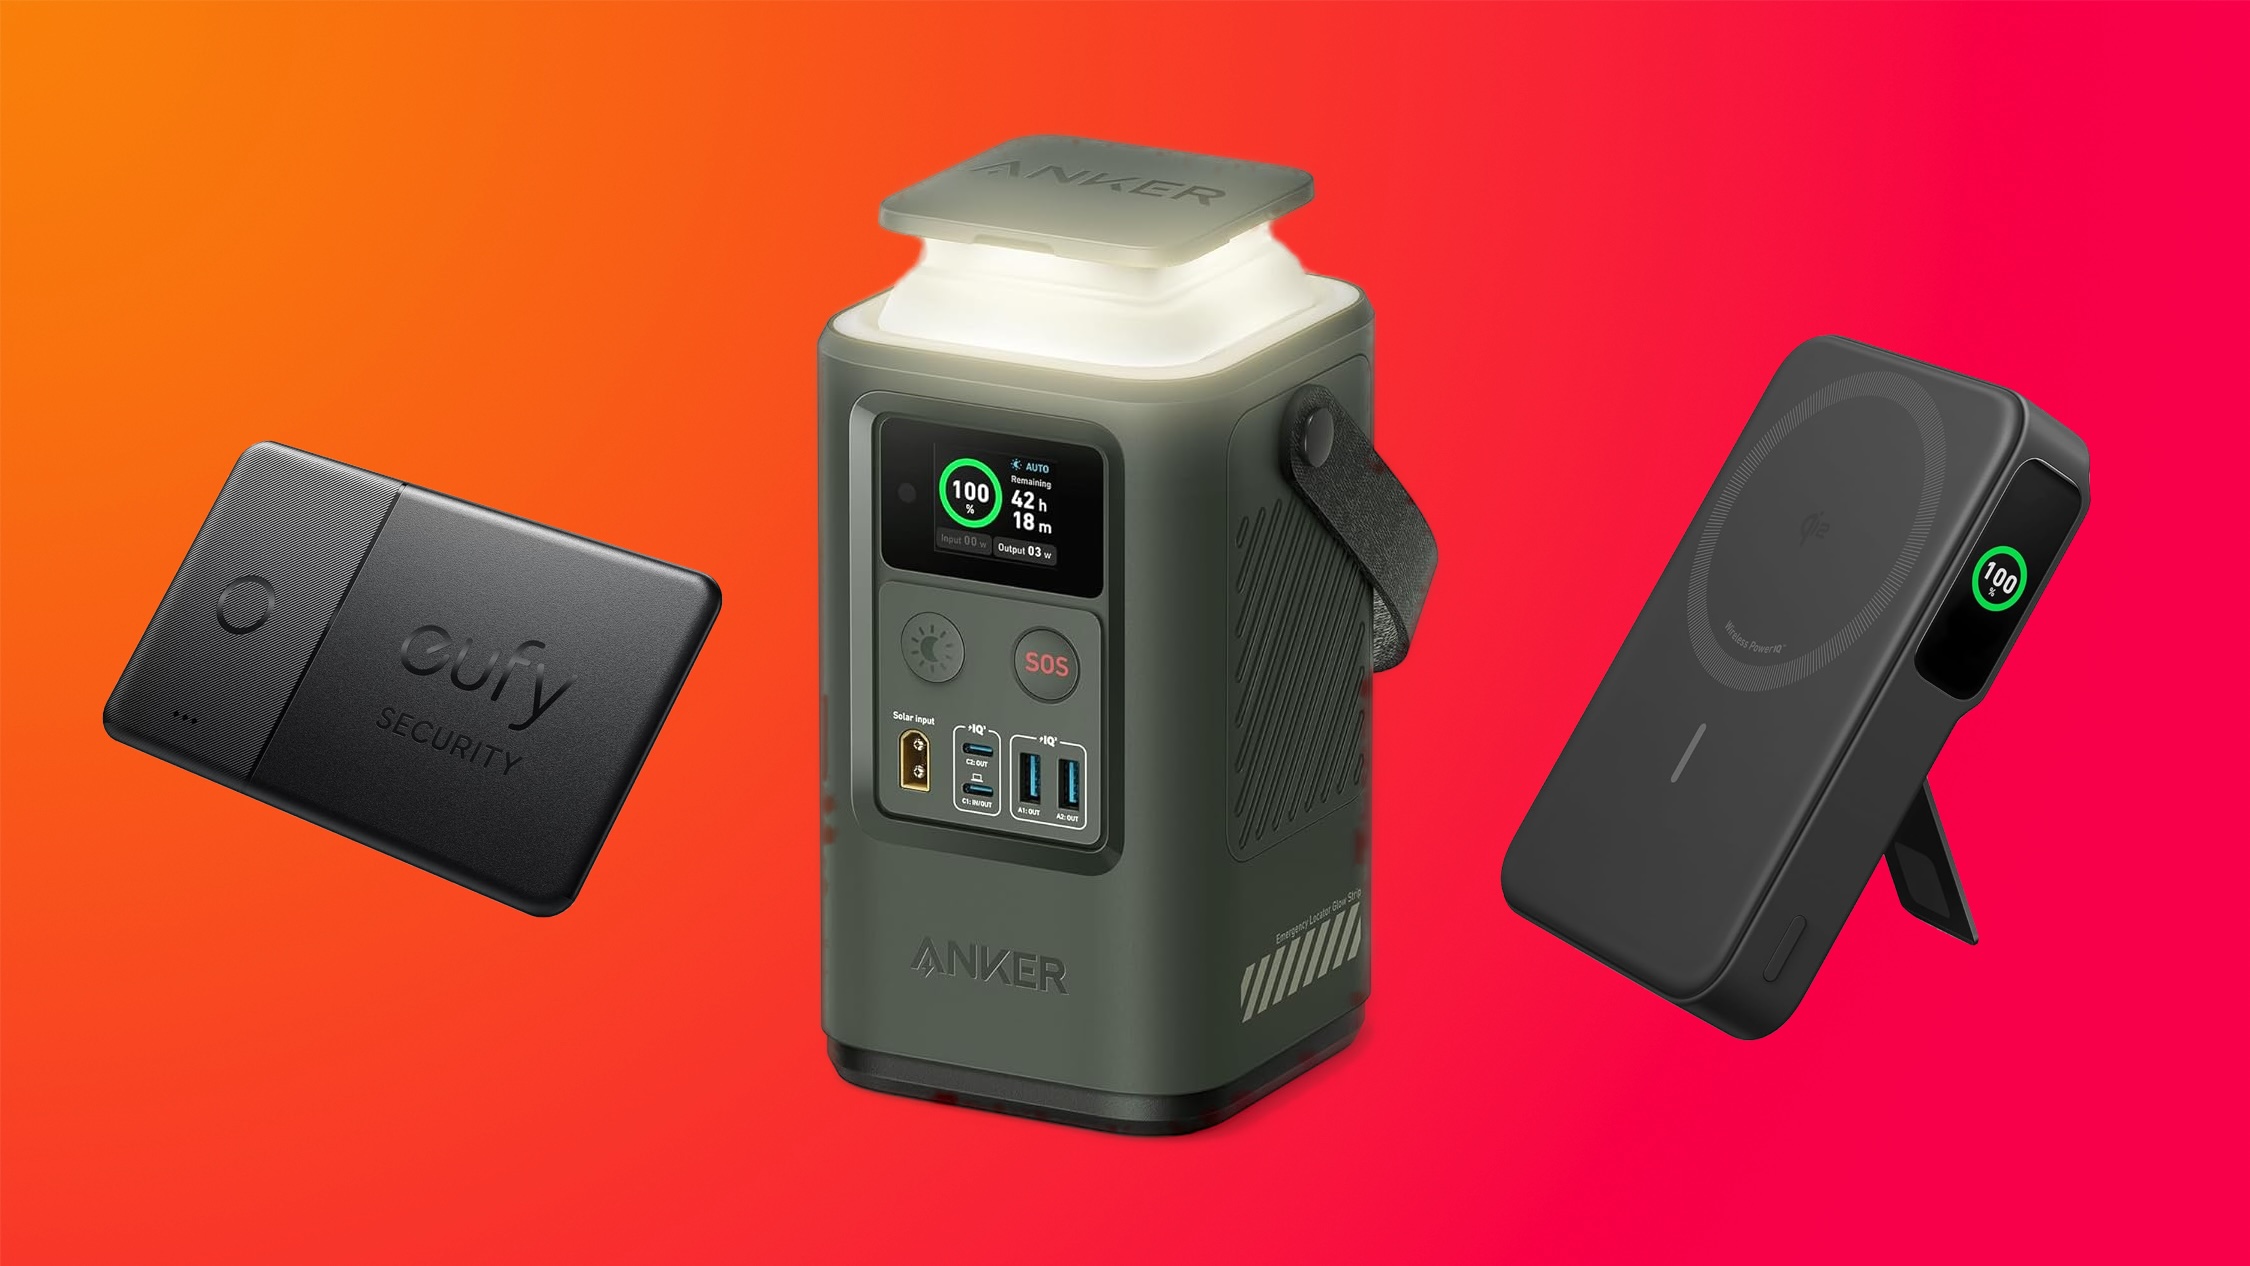 Amazon’s New Sale Has Big Savings on Popular Accessories From Anker, Eufy, and Jackery